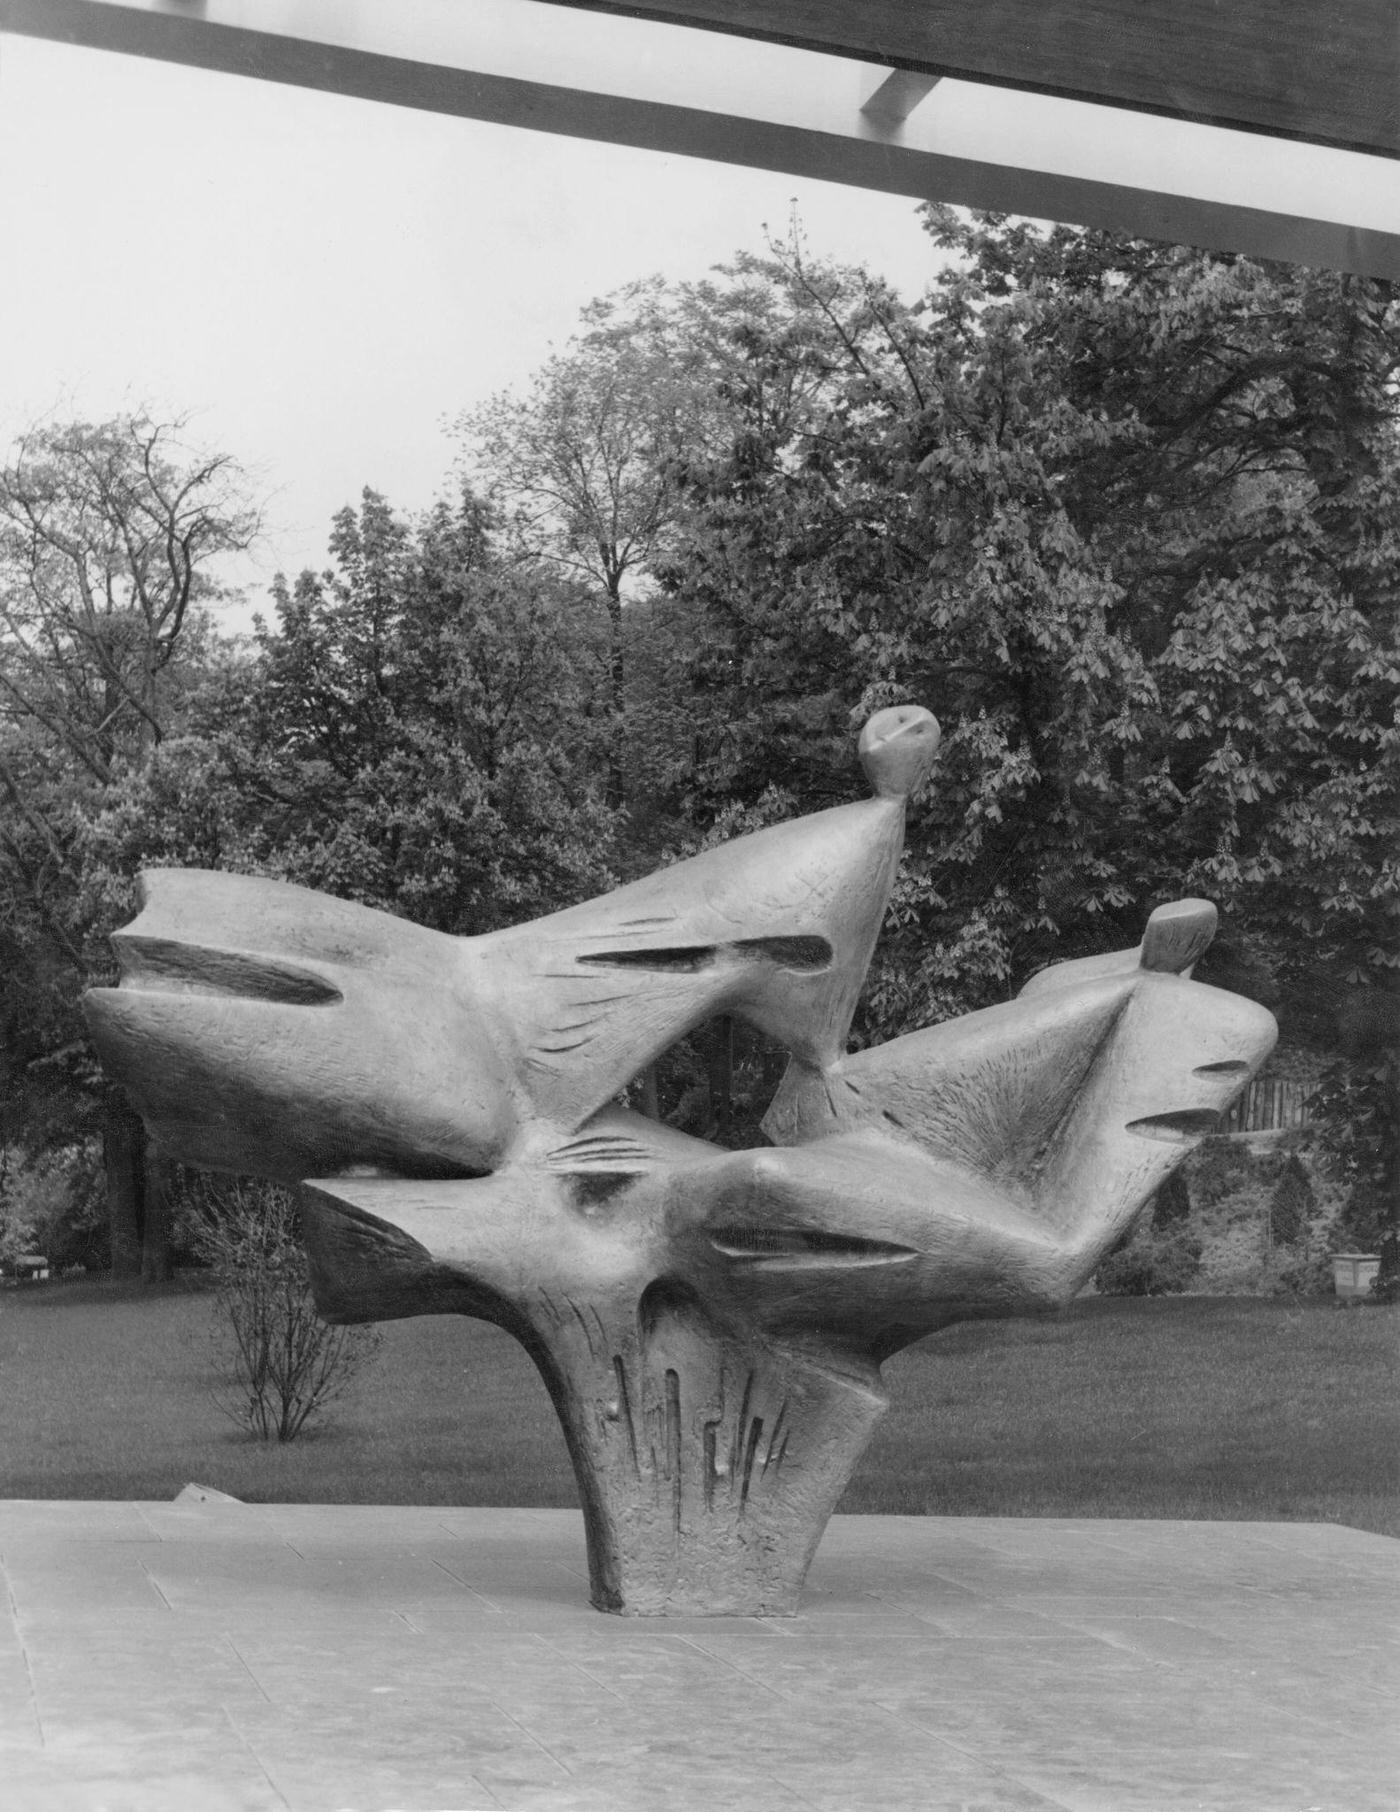 Sculpture by Bernhard Heiliger 'Human and progress, figure tree' in front of the German Pavilion